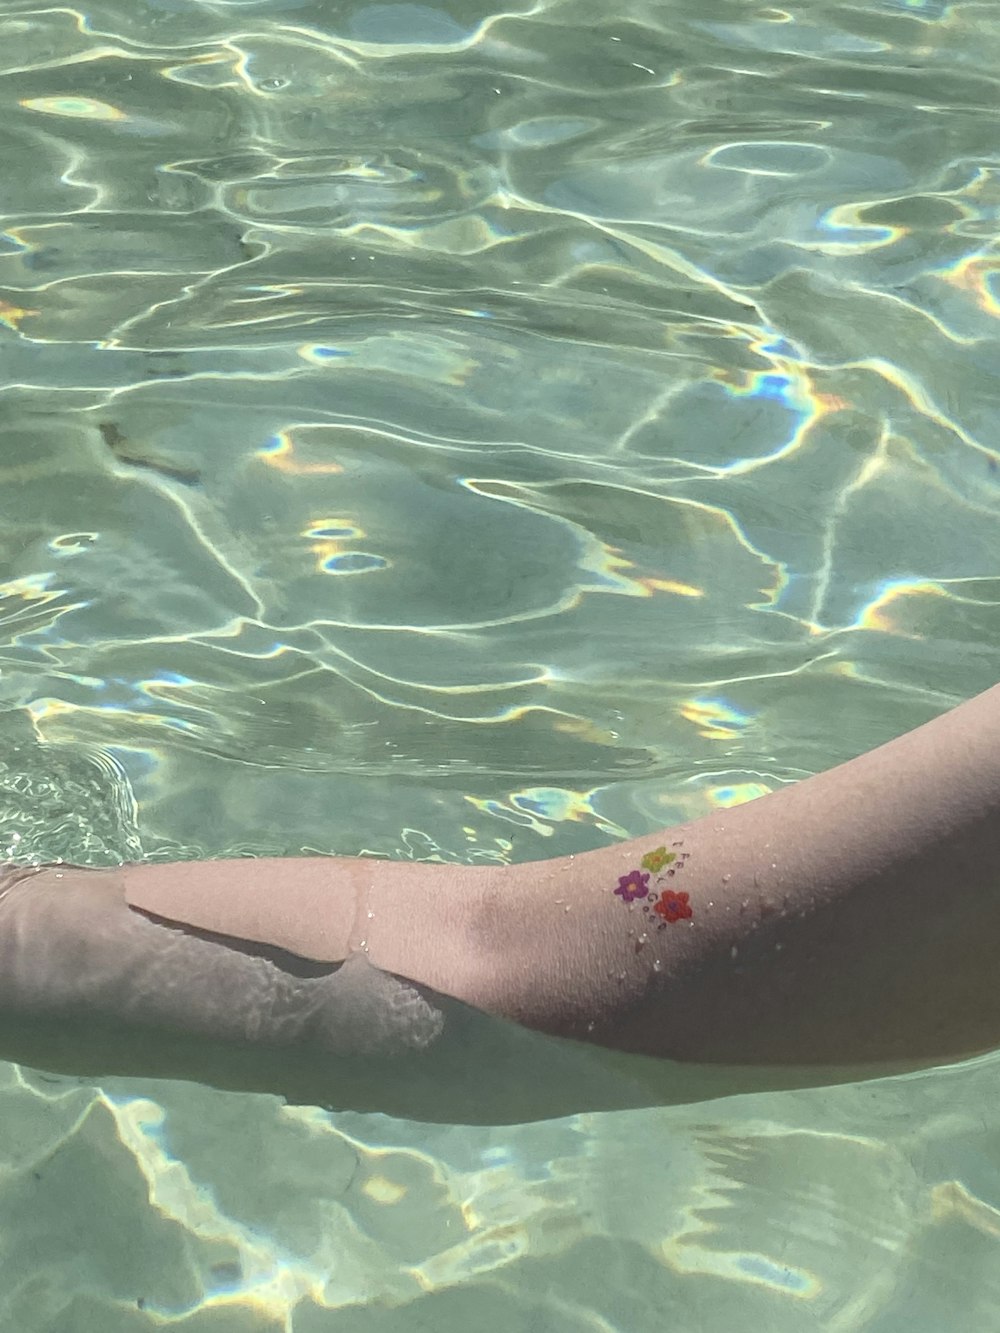 a person's arm in the water with a flower on it